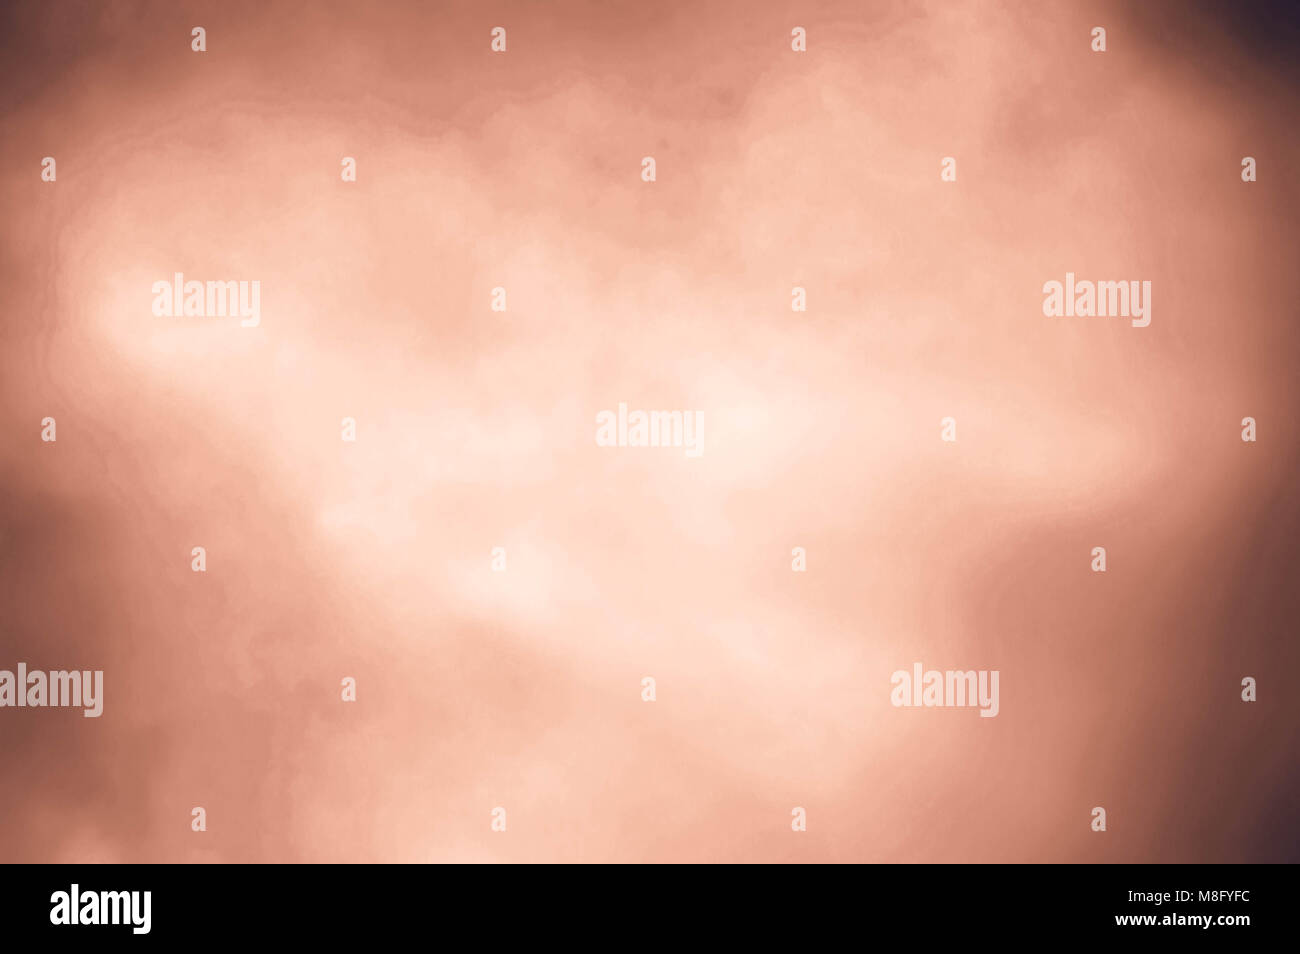 Simple background in soft colors Stock Photo